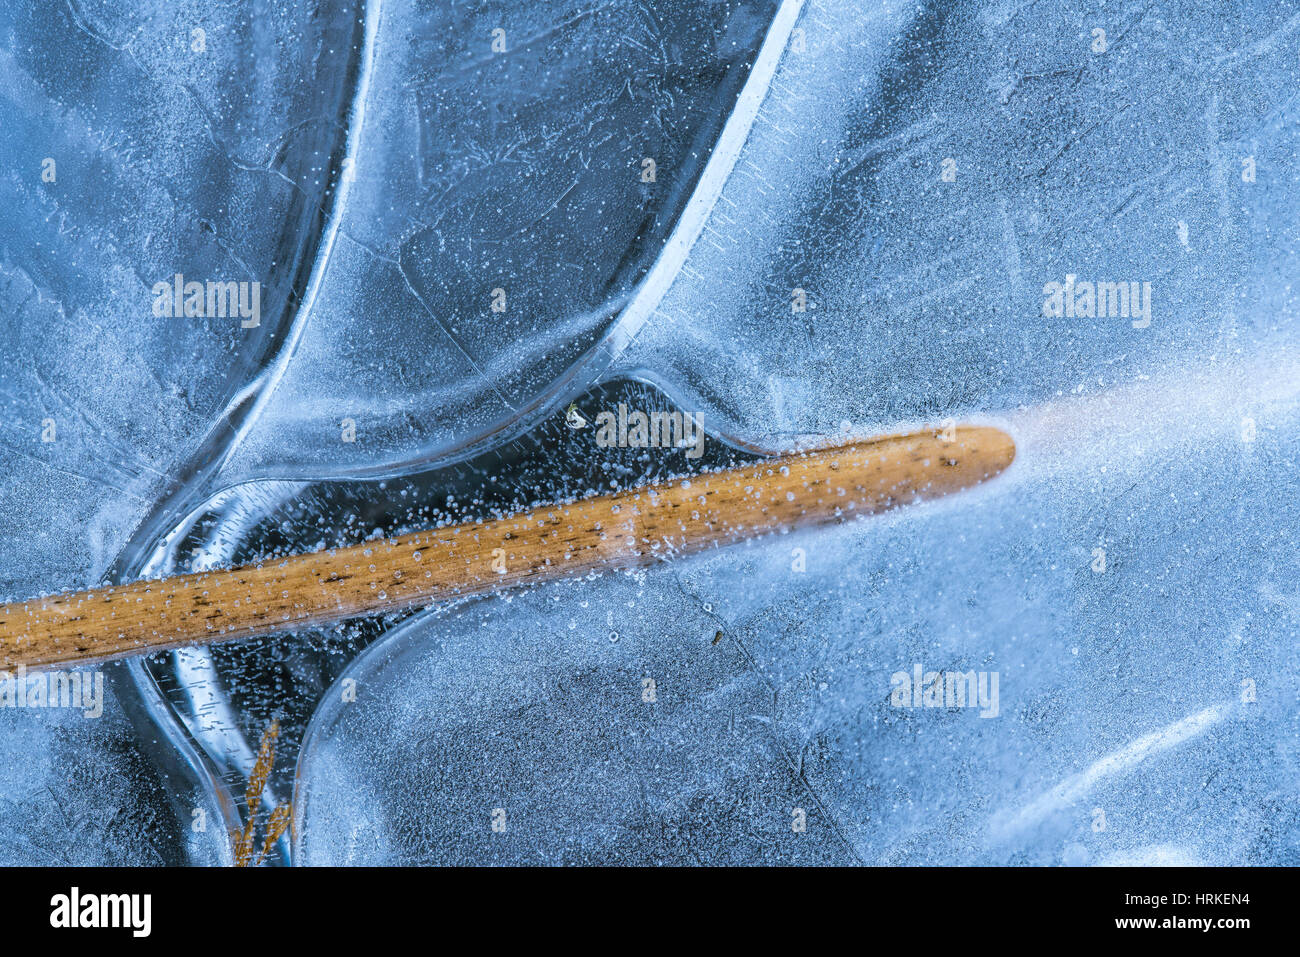 Close-Up of a Scirpus going through beautifully shaped ice and frozen bubbles Stock Photo